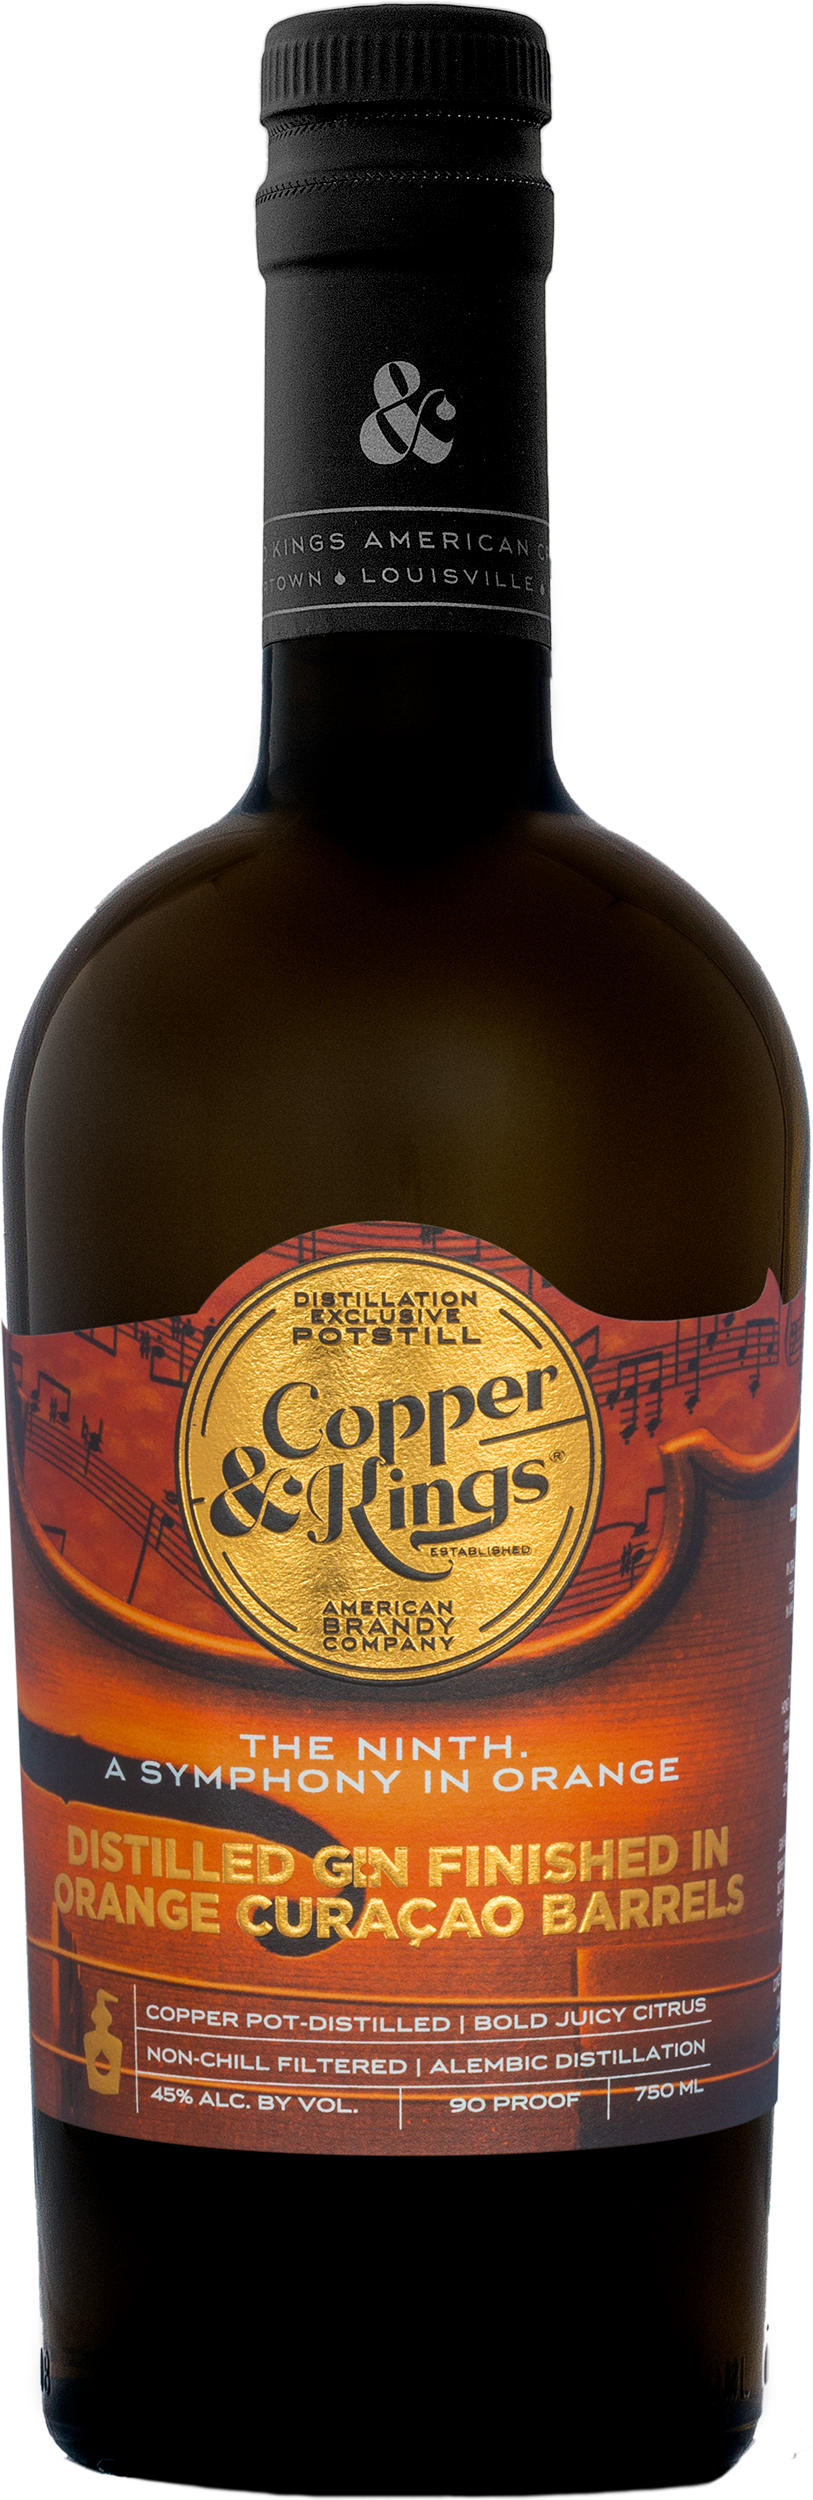 Gin The Ninth Copper & Kings